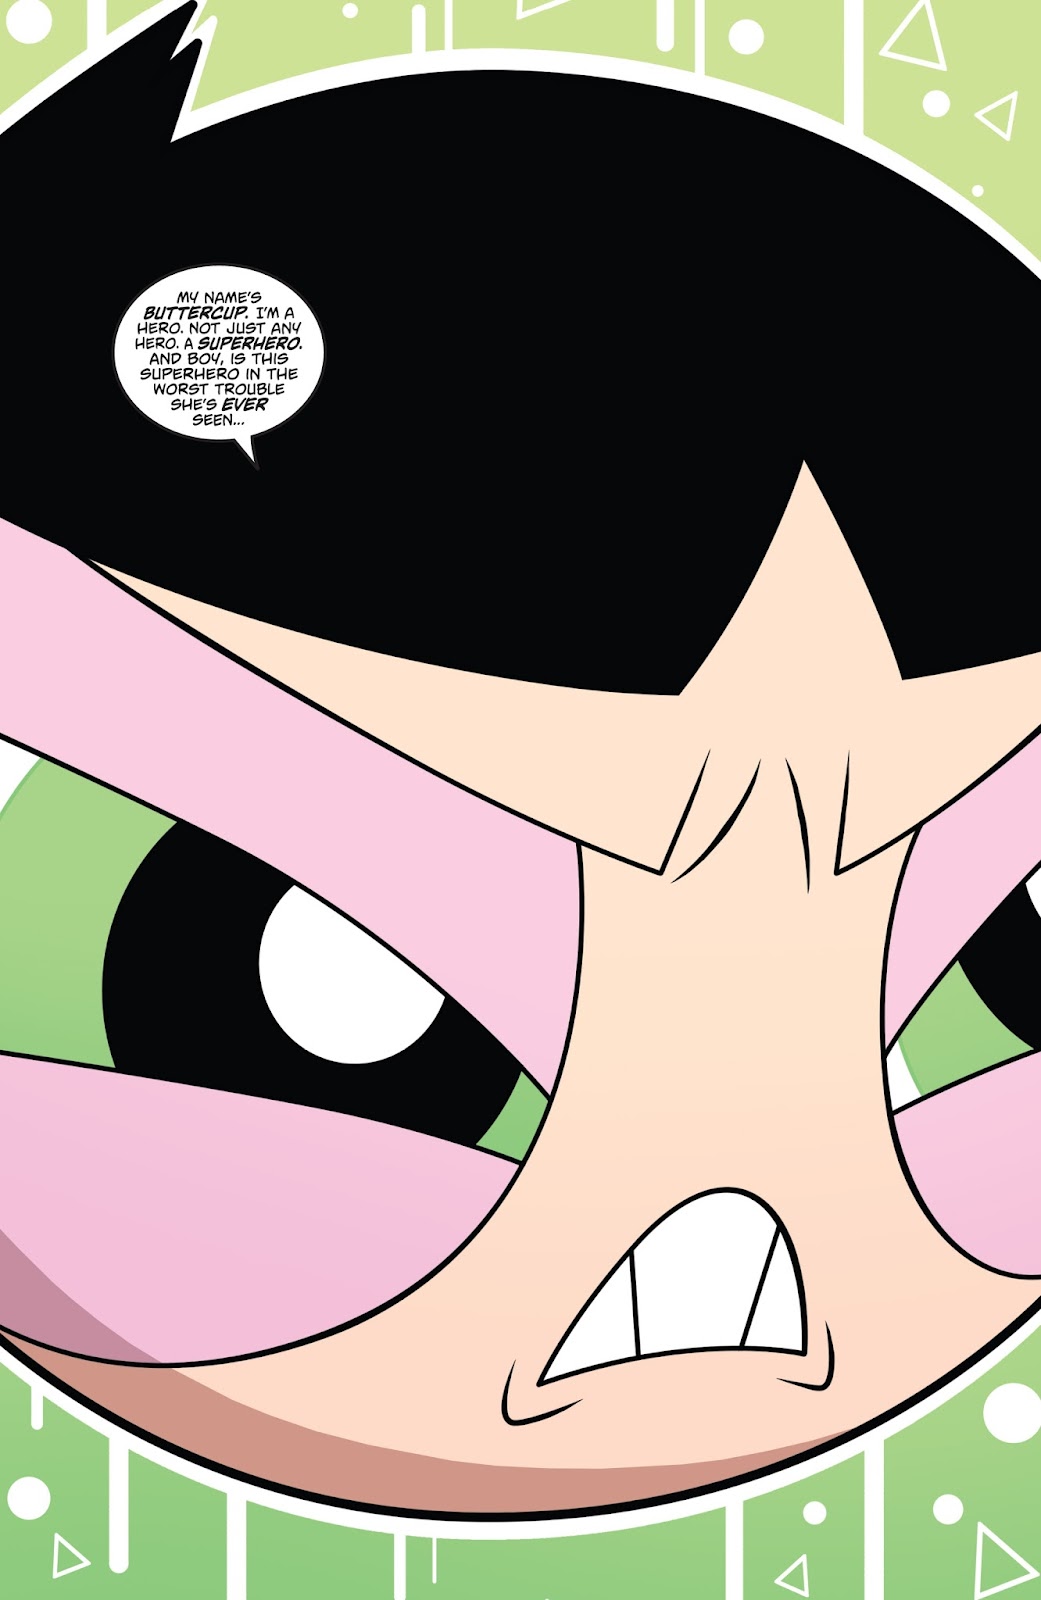 Powerpuff Girls: The Time Tie issue 3 - Page 3